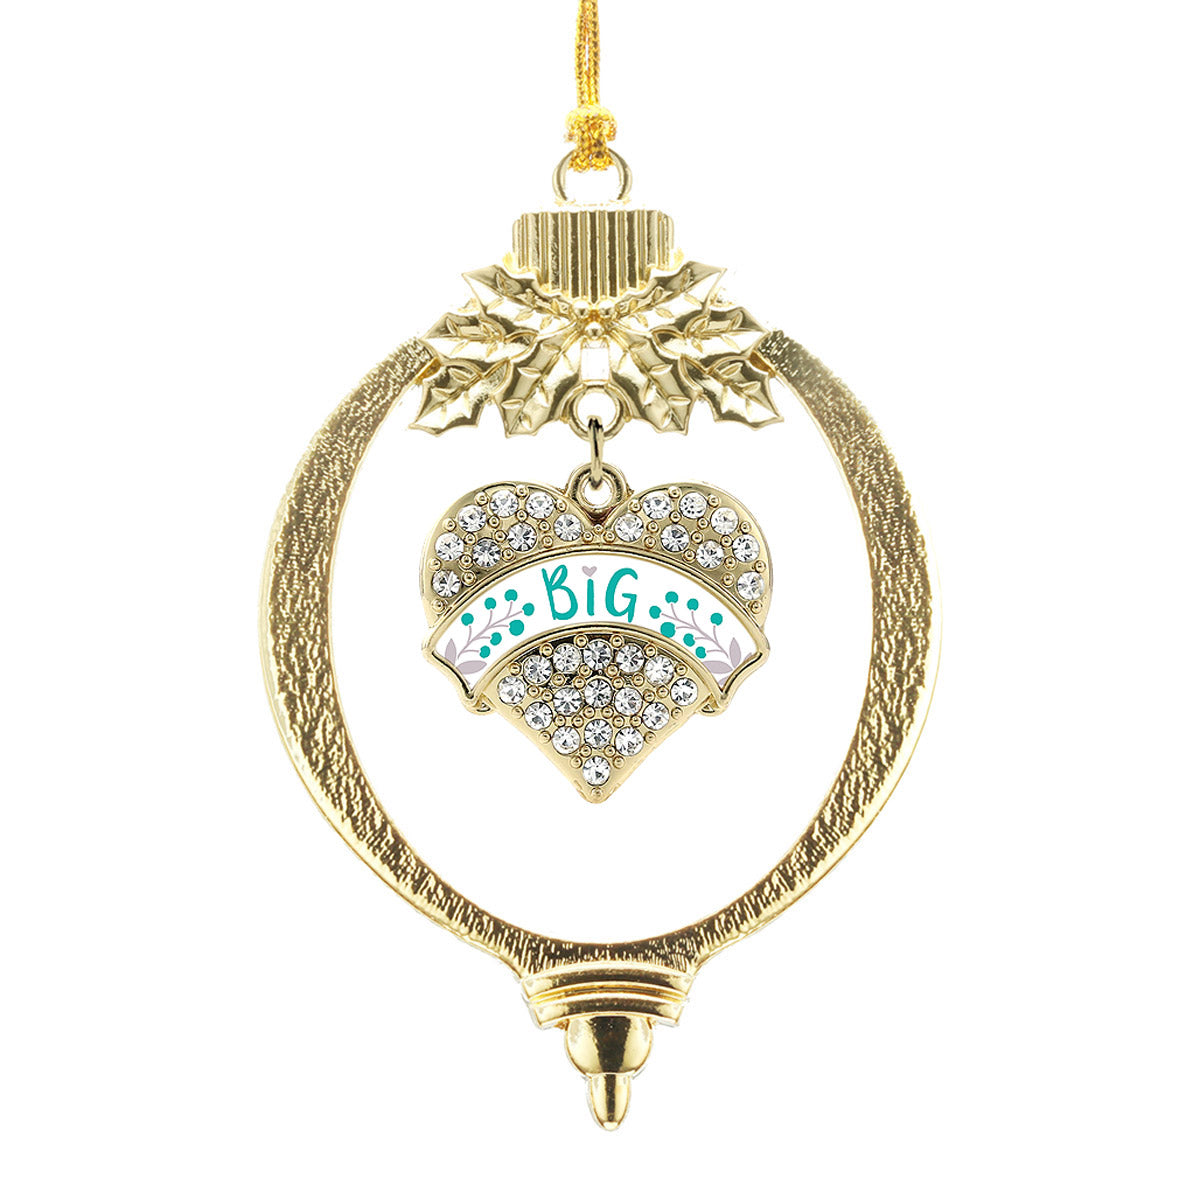 Gold Teal and Gray Big Pave Heart Charm Holiday Ornament